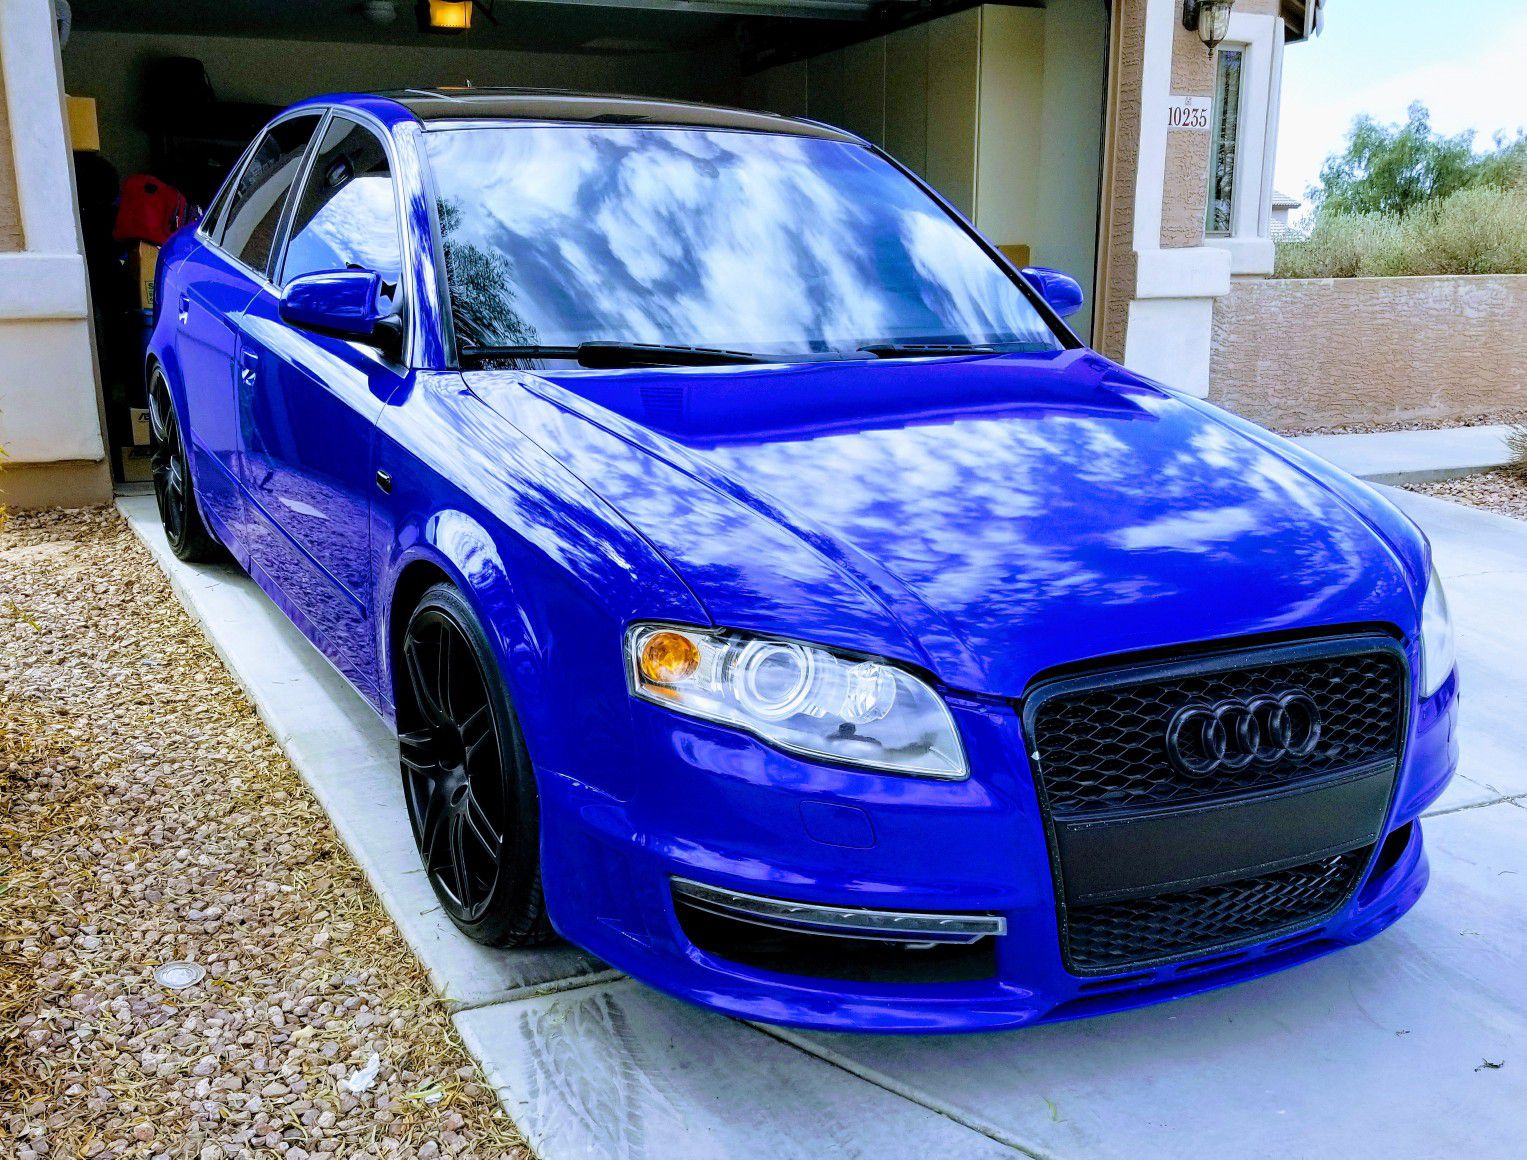 B7 Audi A4 Stage 2+( Heavily but Tastefully Modded ) over $18,000 in Upgrades and work done! Has tons of POWER and looks Beautiful!